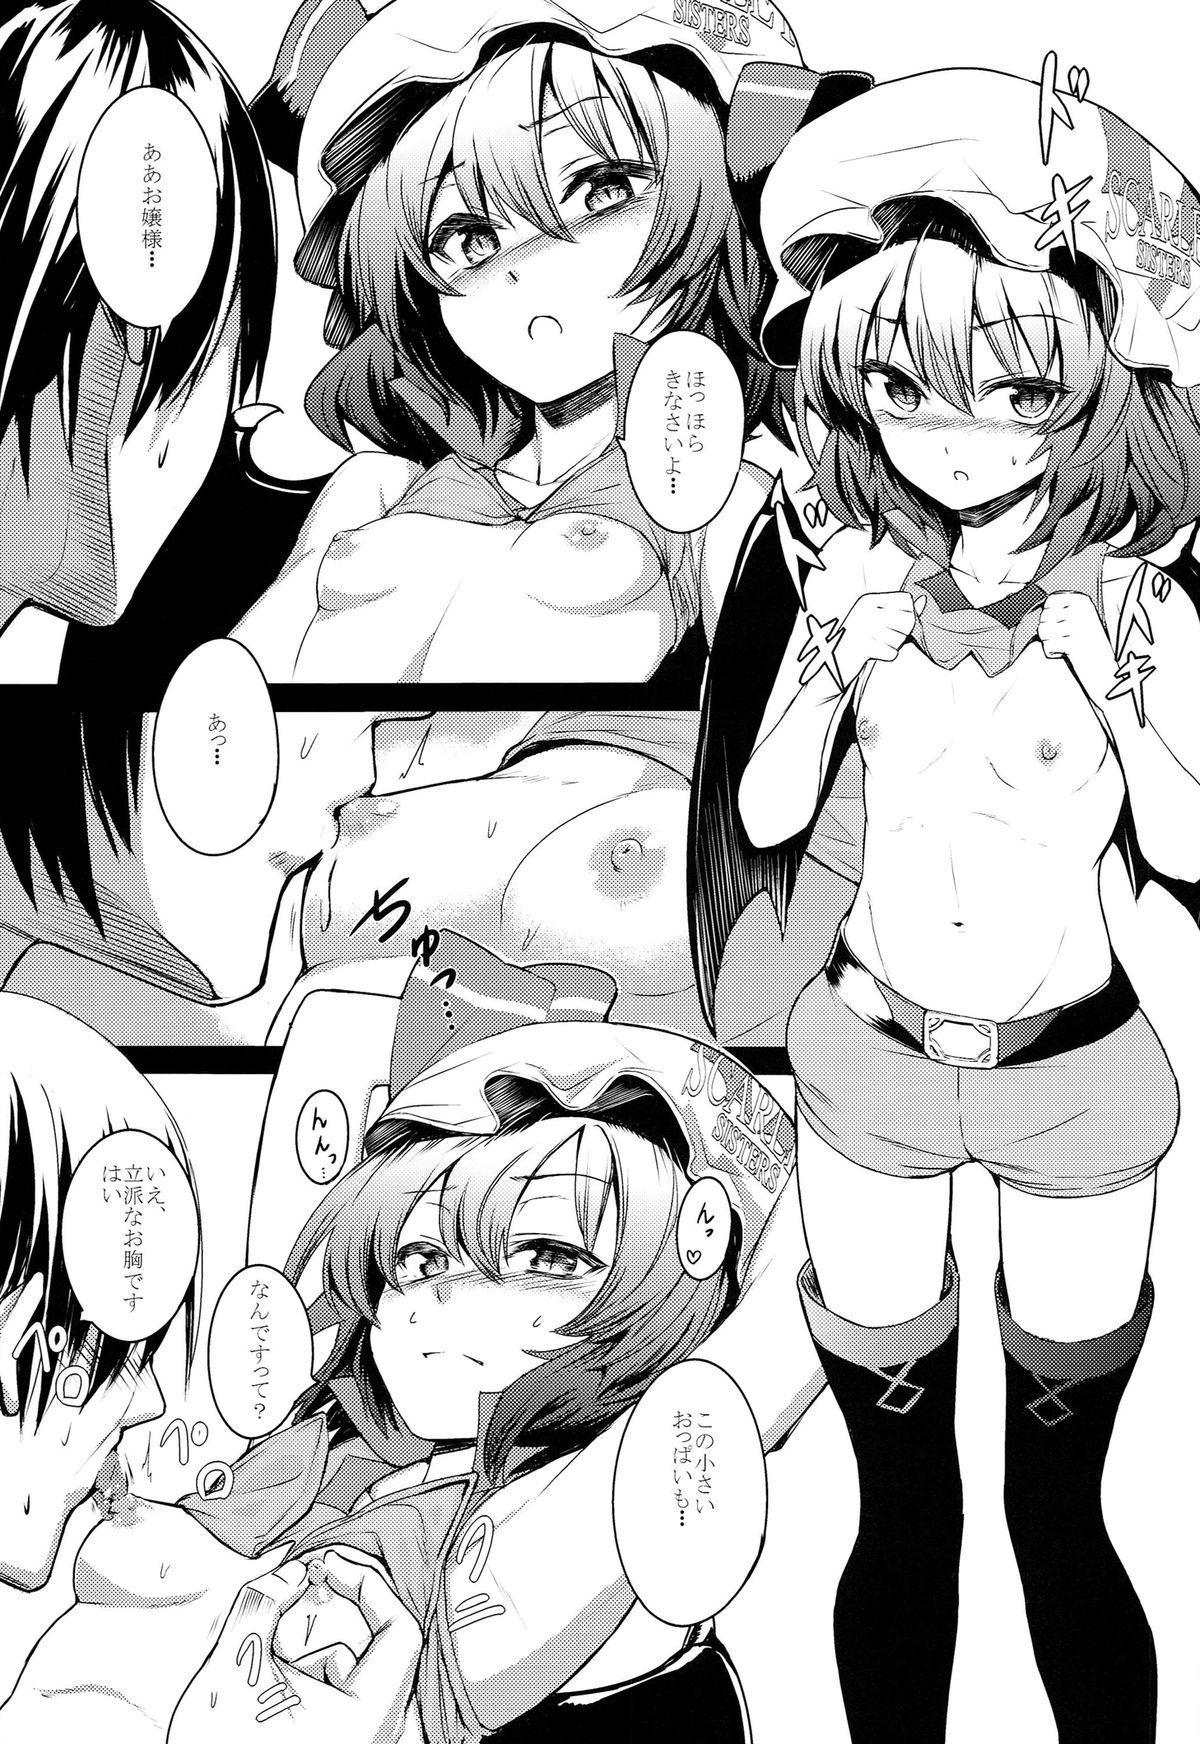 Negra TOUHOU RACE QUEENS COLLABO CLUB - Touhou project Fingering - Page 6